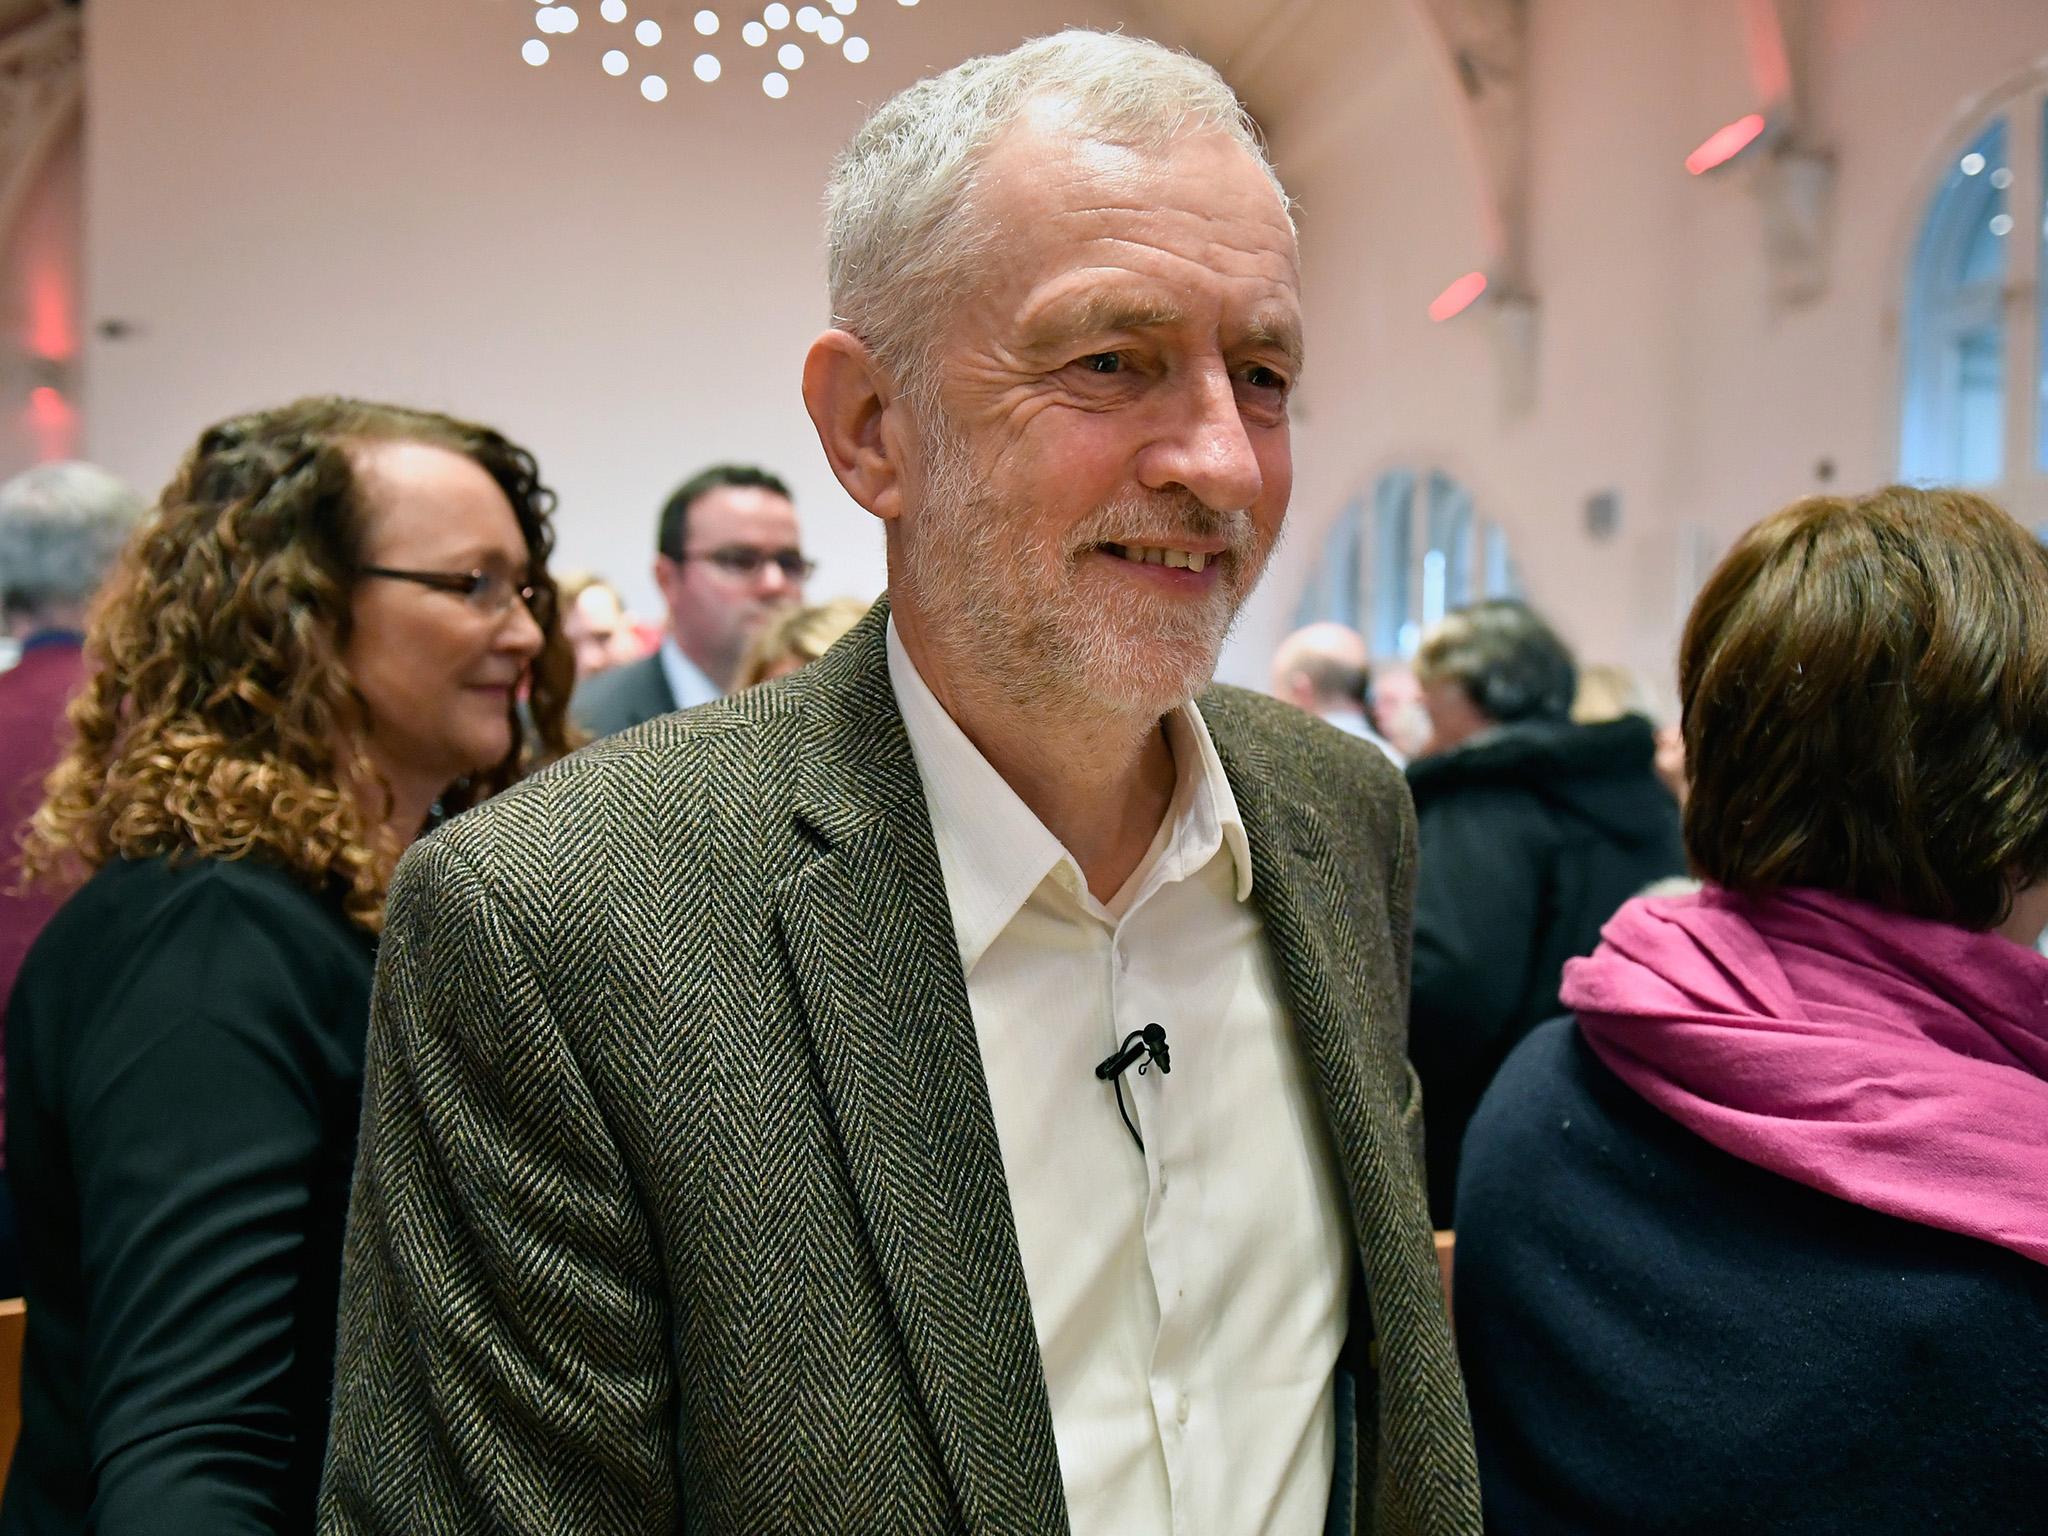 Jeremy Corbyn has come under fire for his comments at an LGBT History Month event